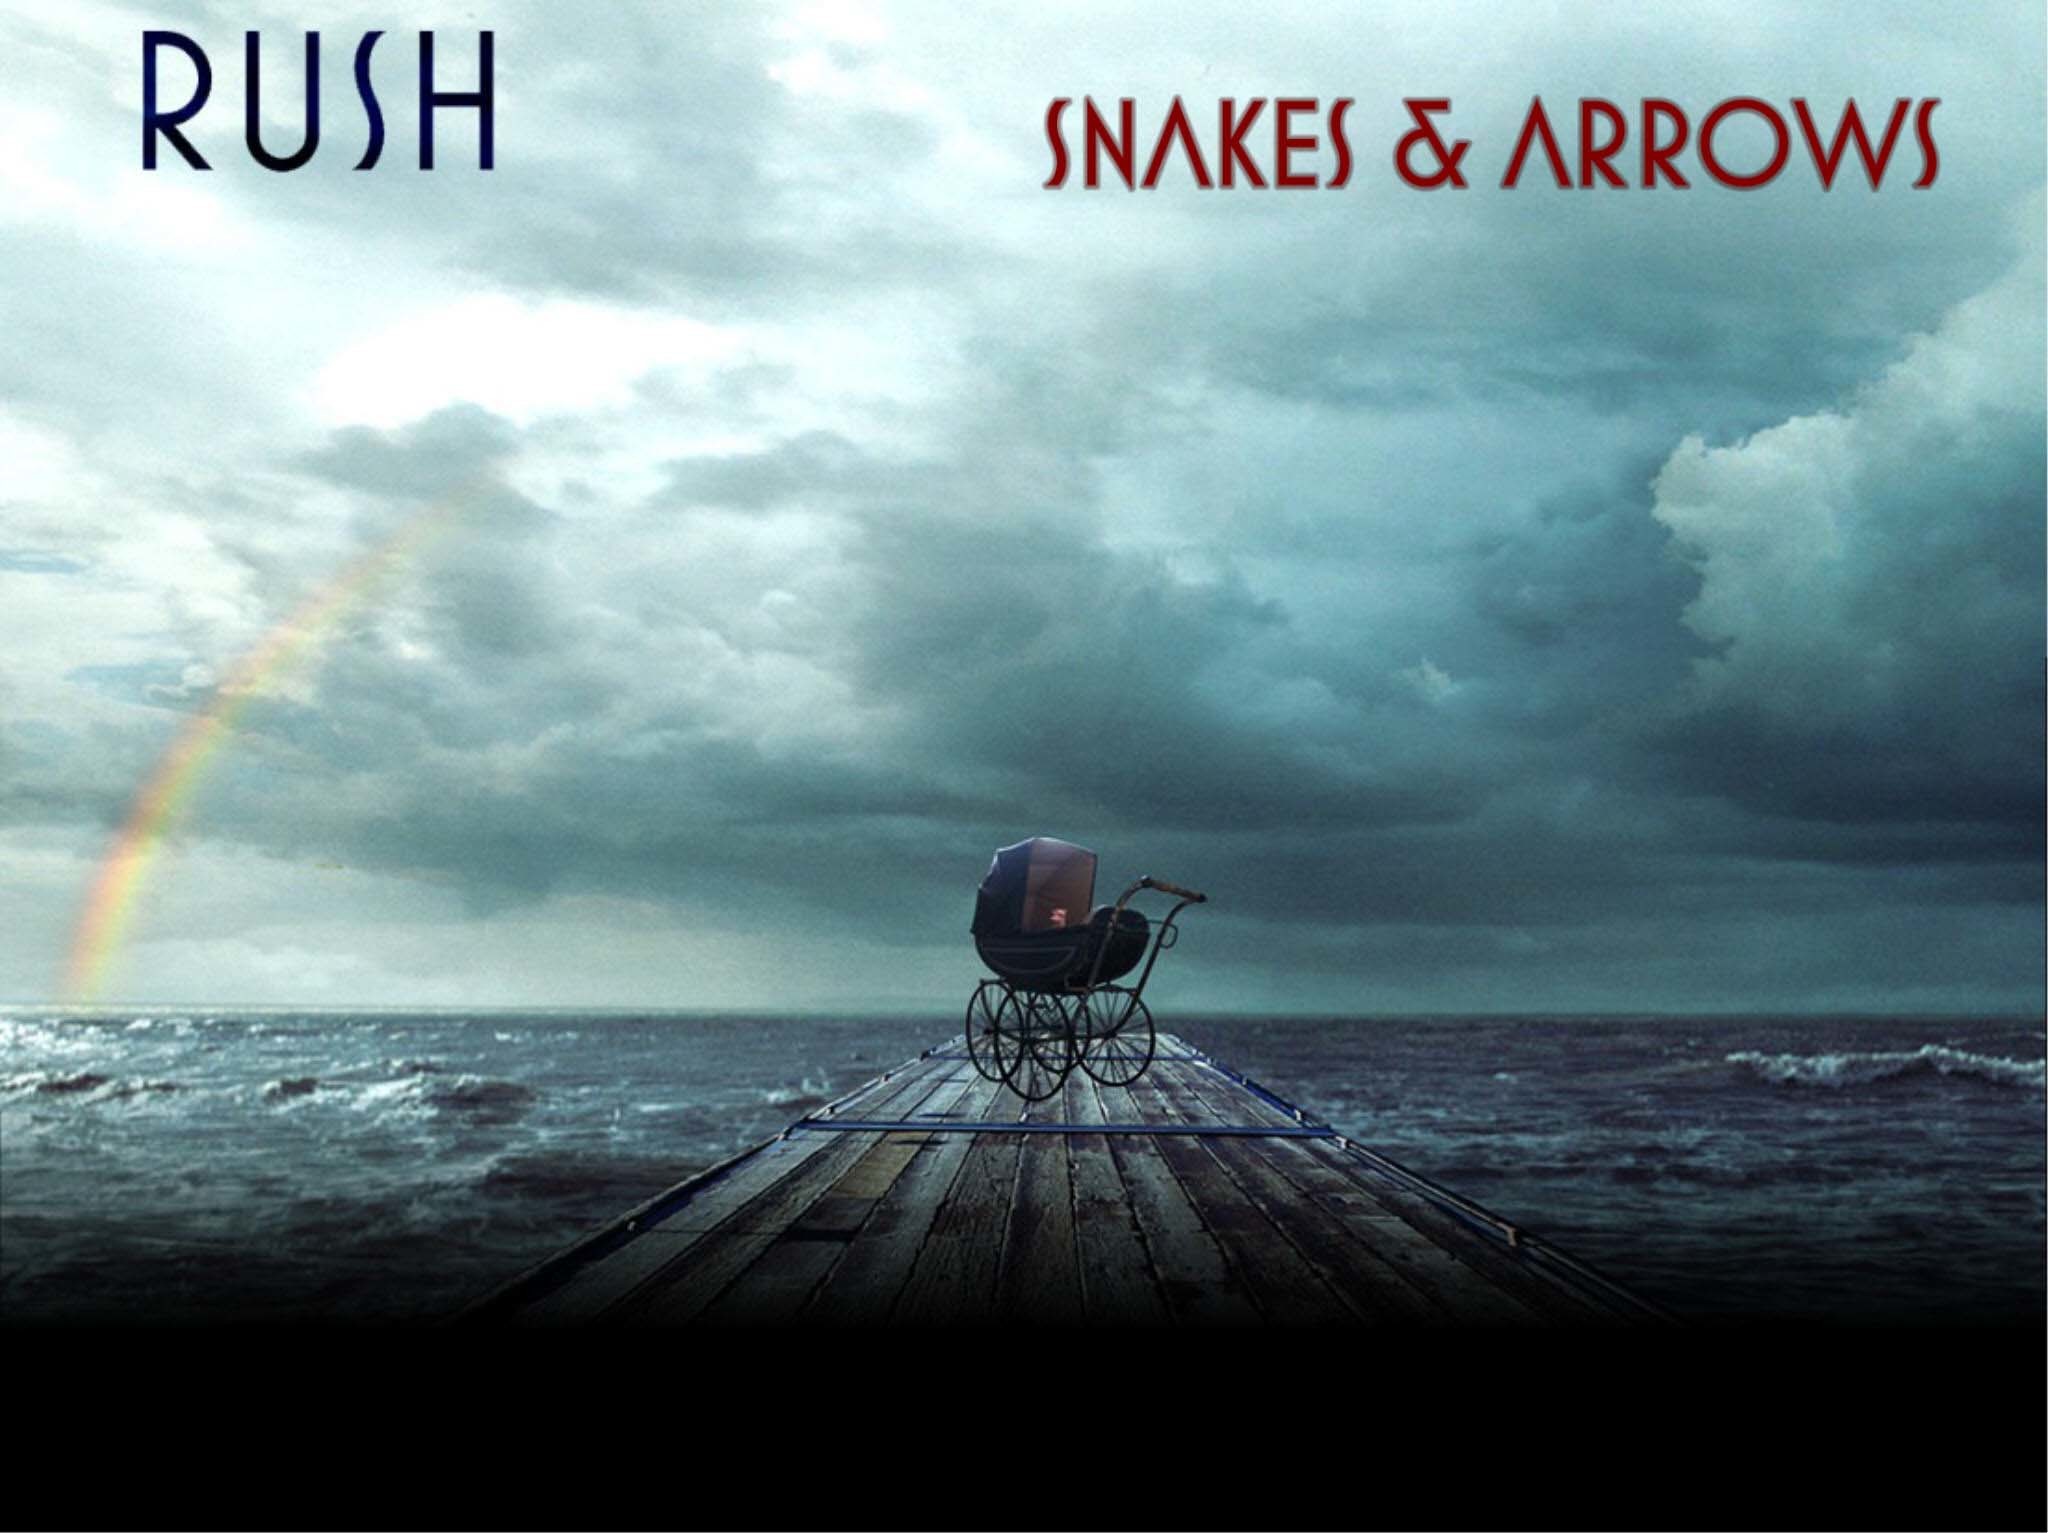 2048x1533 Rush Fly By Night Album Cover Far cry wallpapers - rush